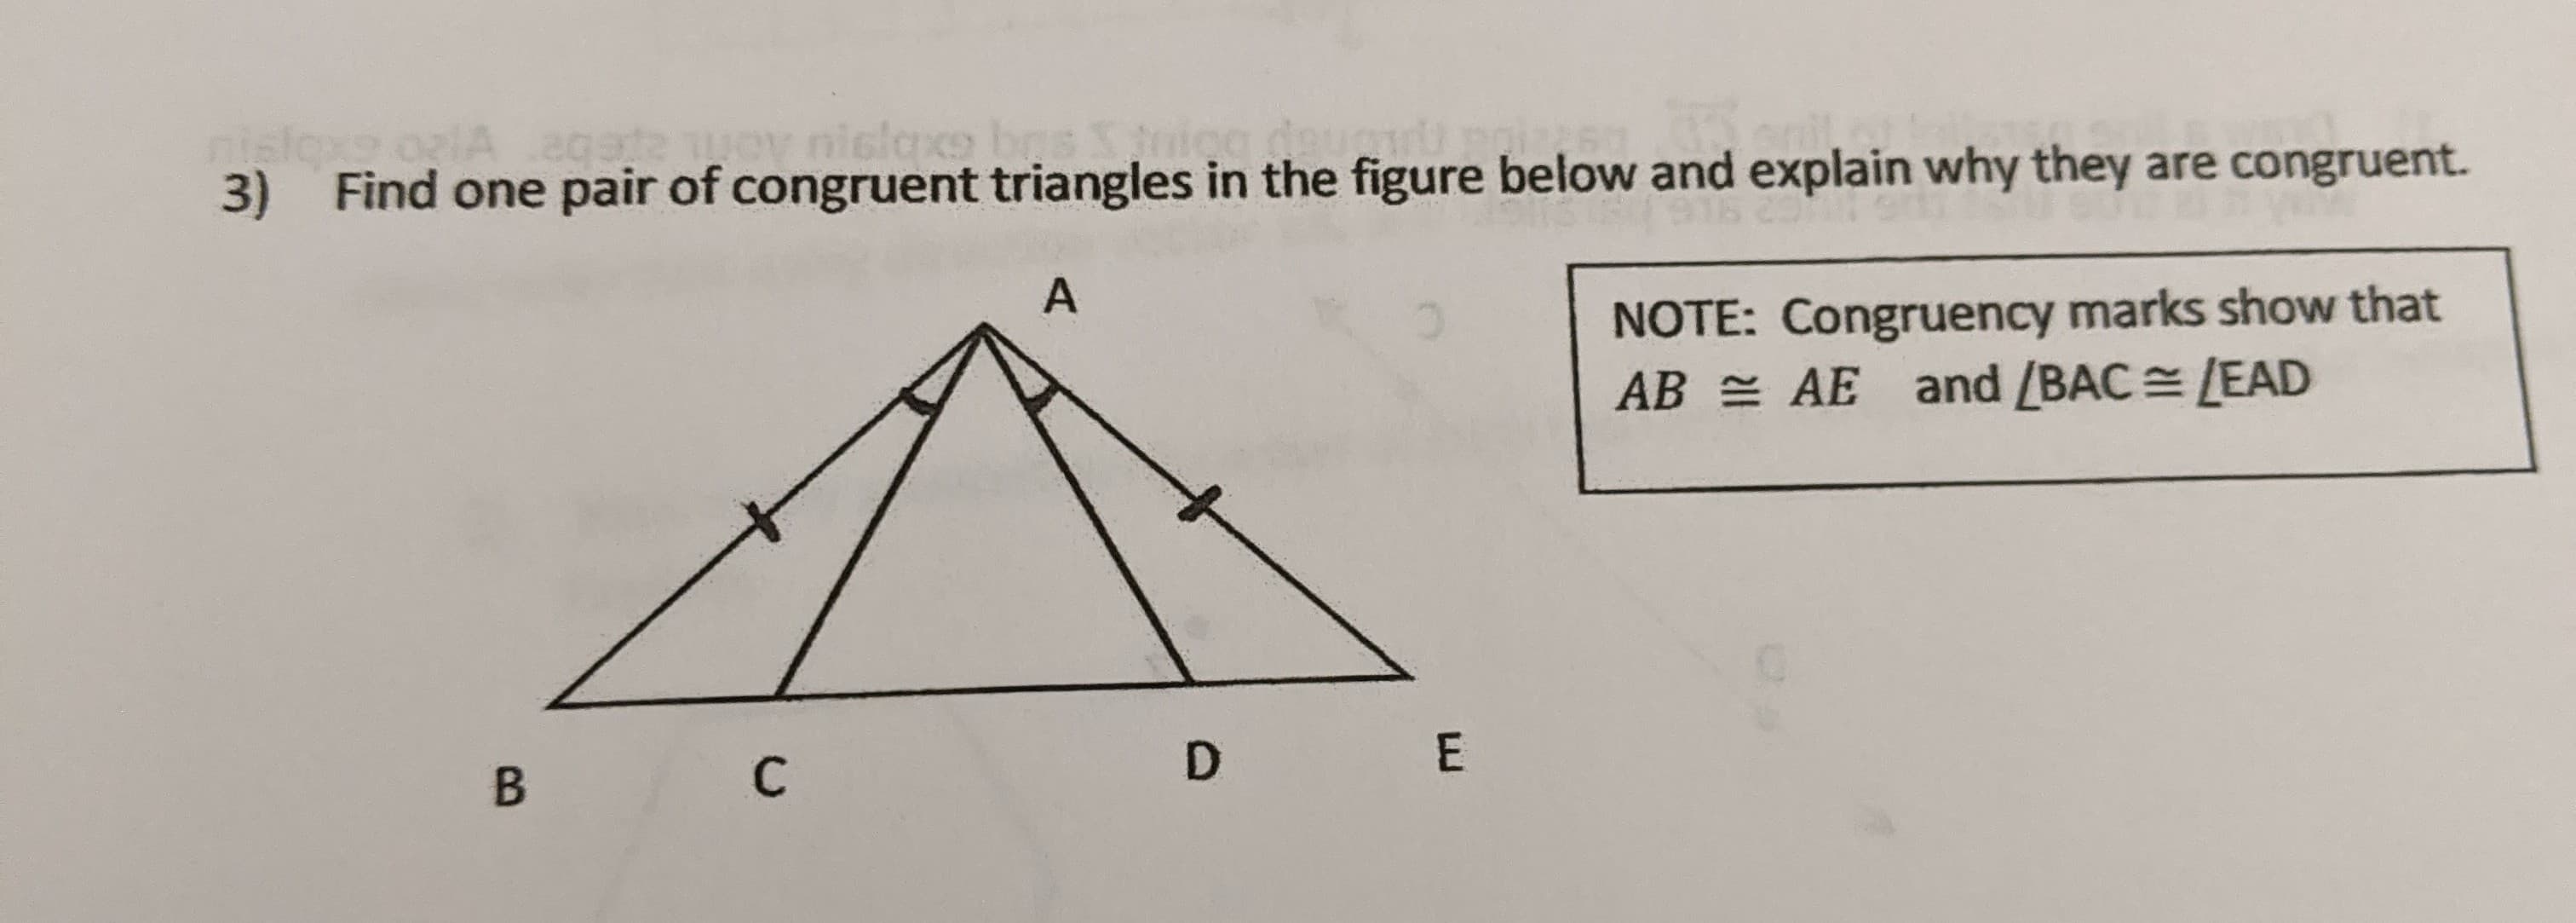 nisloxe orlA agate woy nicloxs bas
3) Find one pair of congruent triangles in the figure below and explain why they are congruent.
A
NOTE: Congruency marks show that
AB = AE and /BAC=LEAD
D
B.
